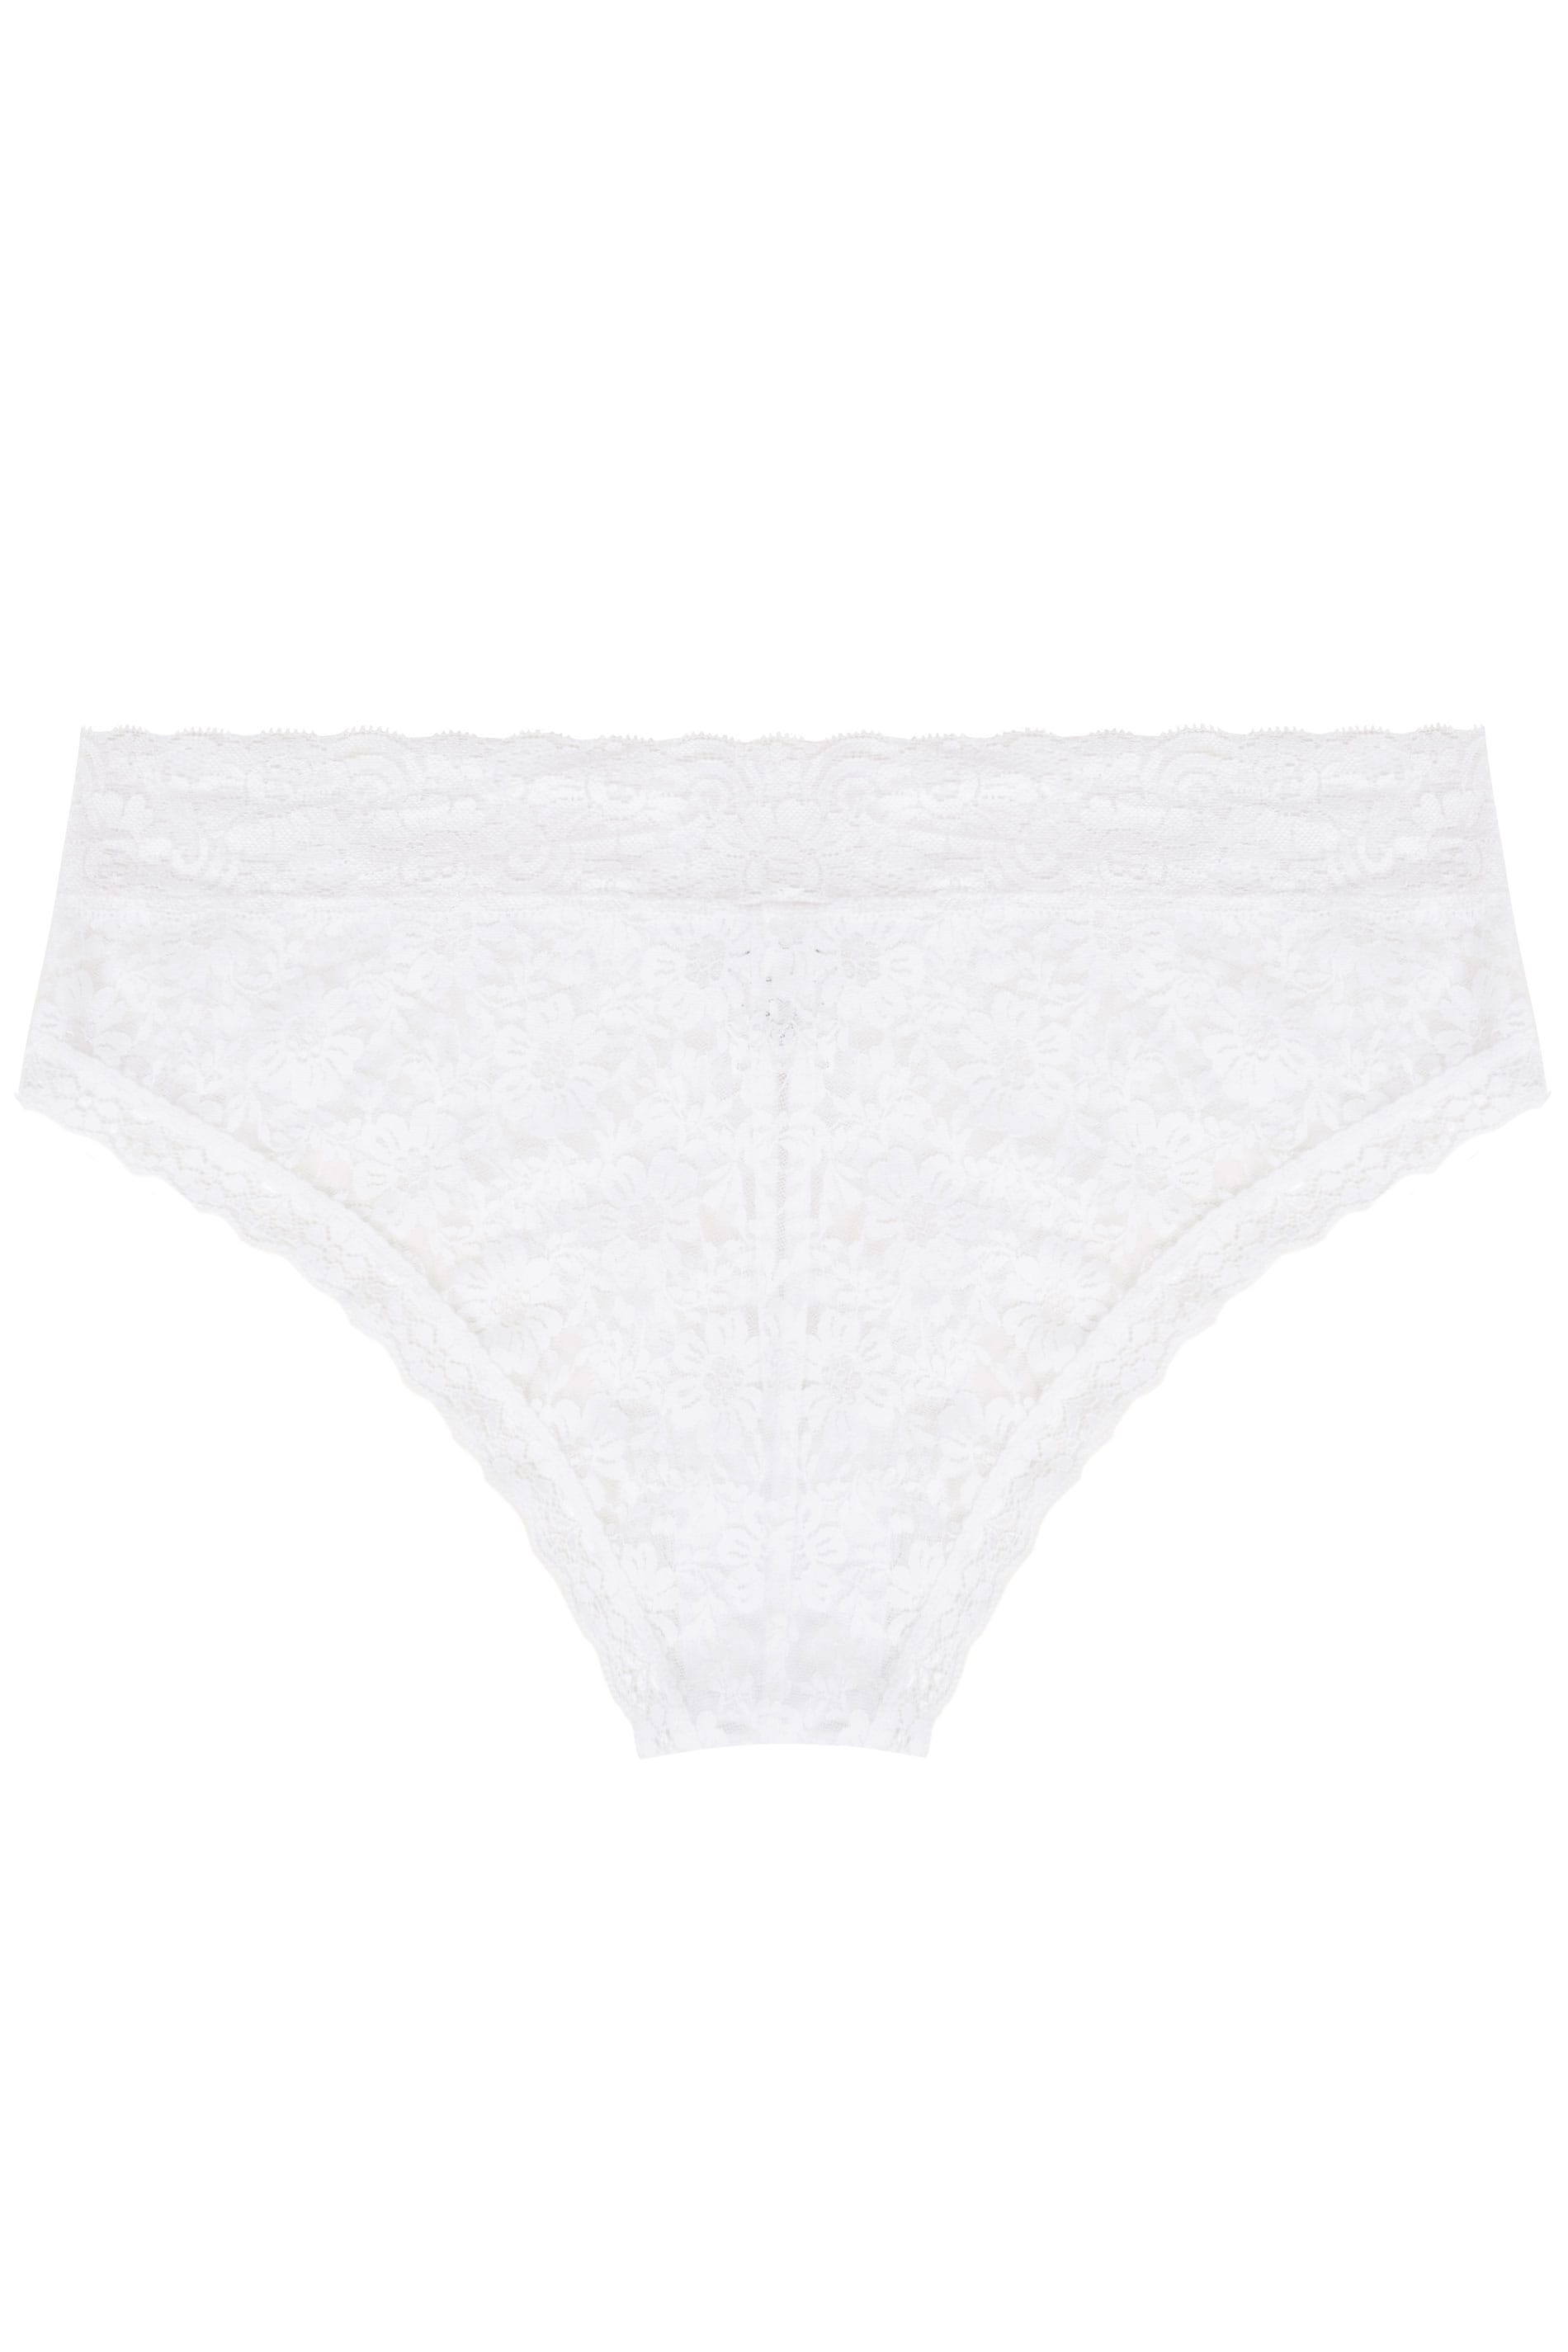 White Lace Low Rise Brazilian Knickers | Yours Clothing 3